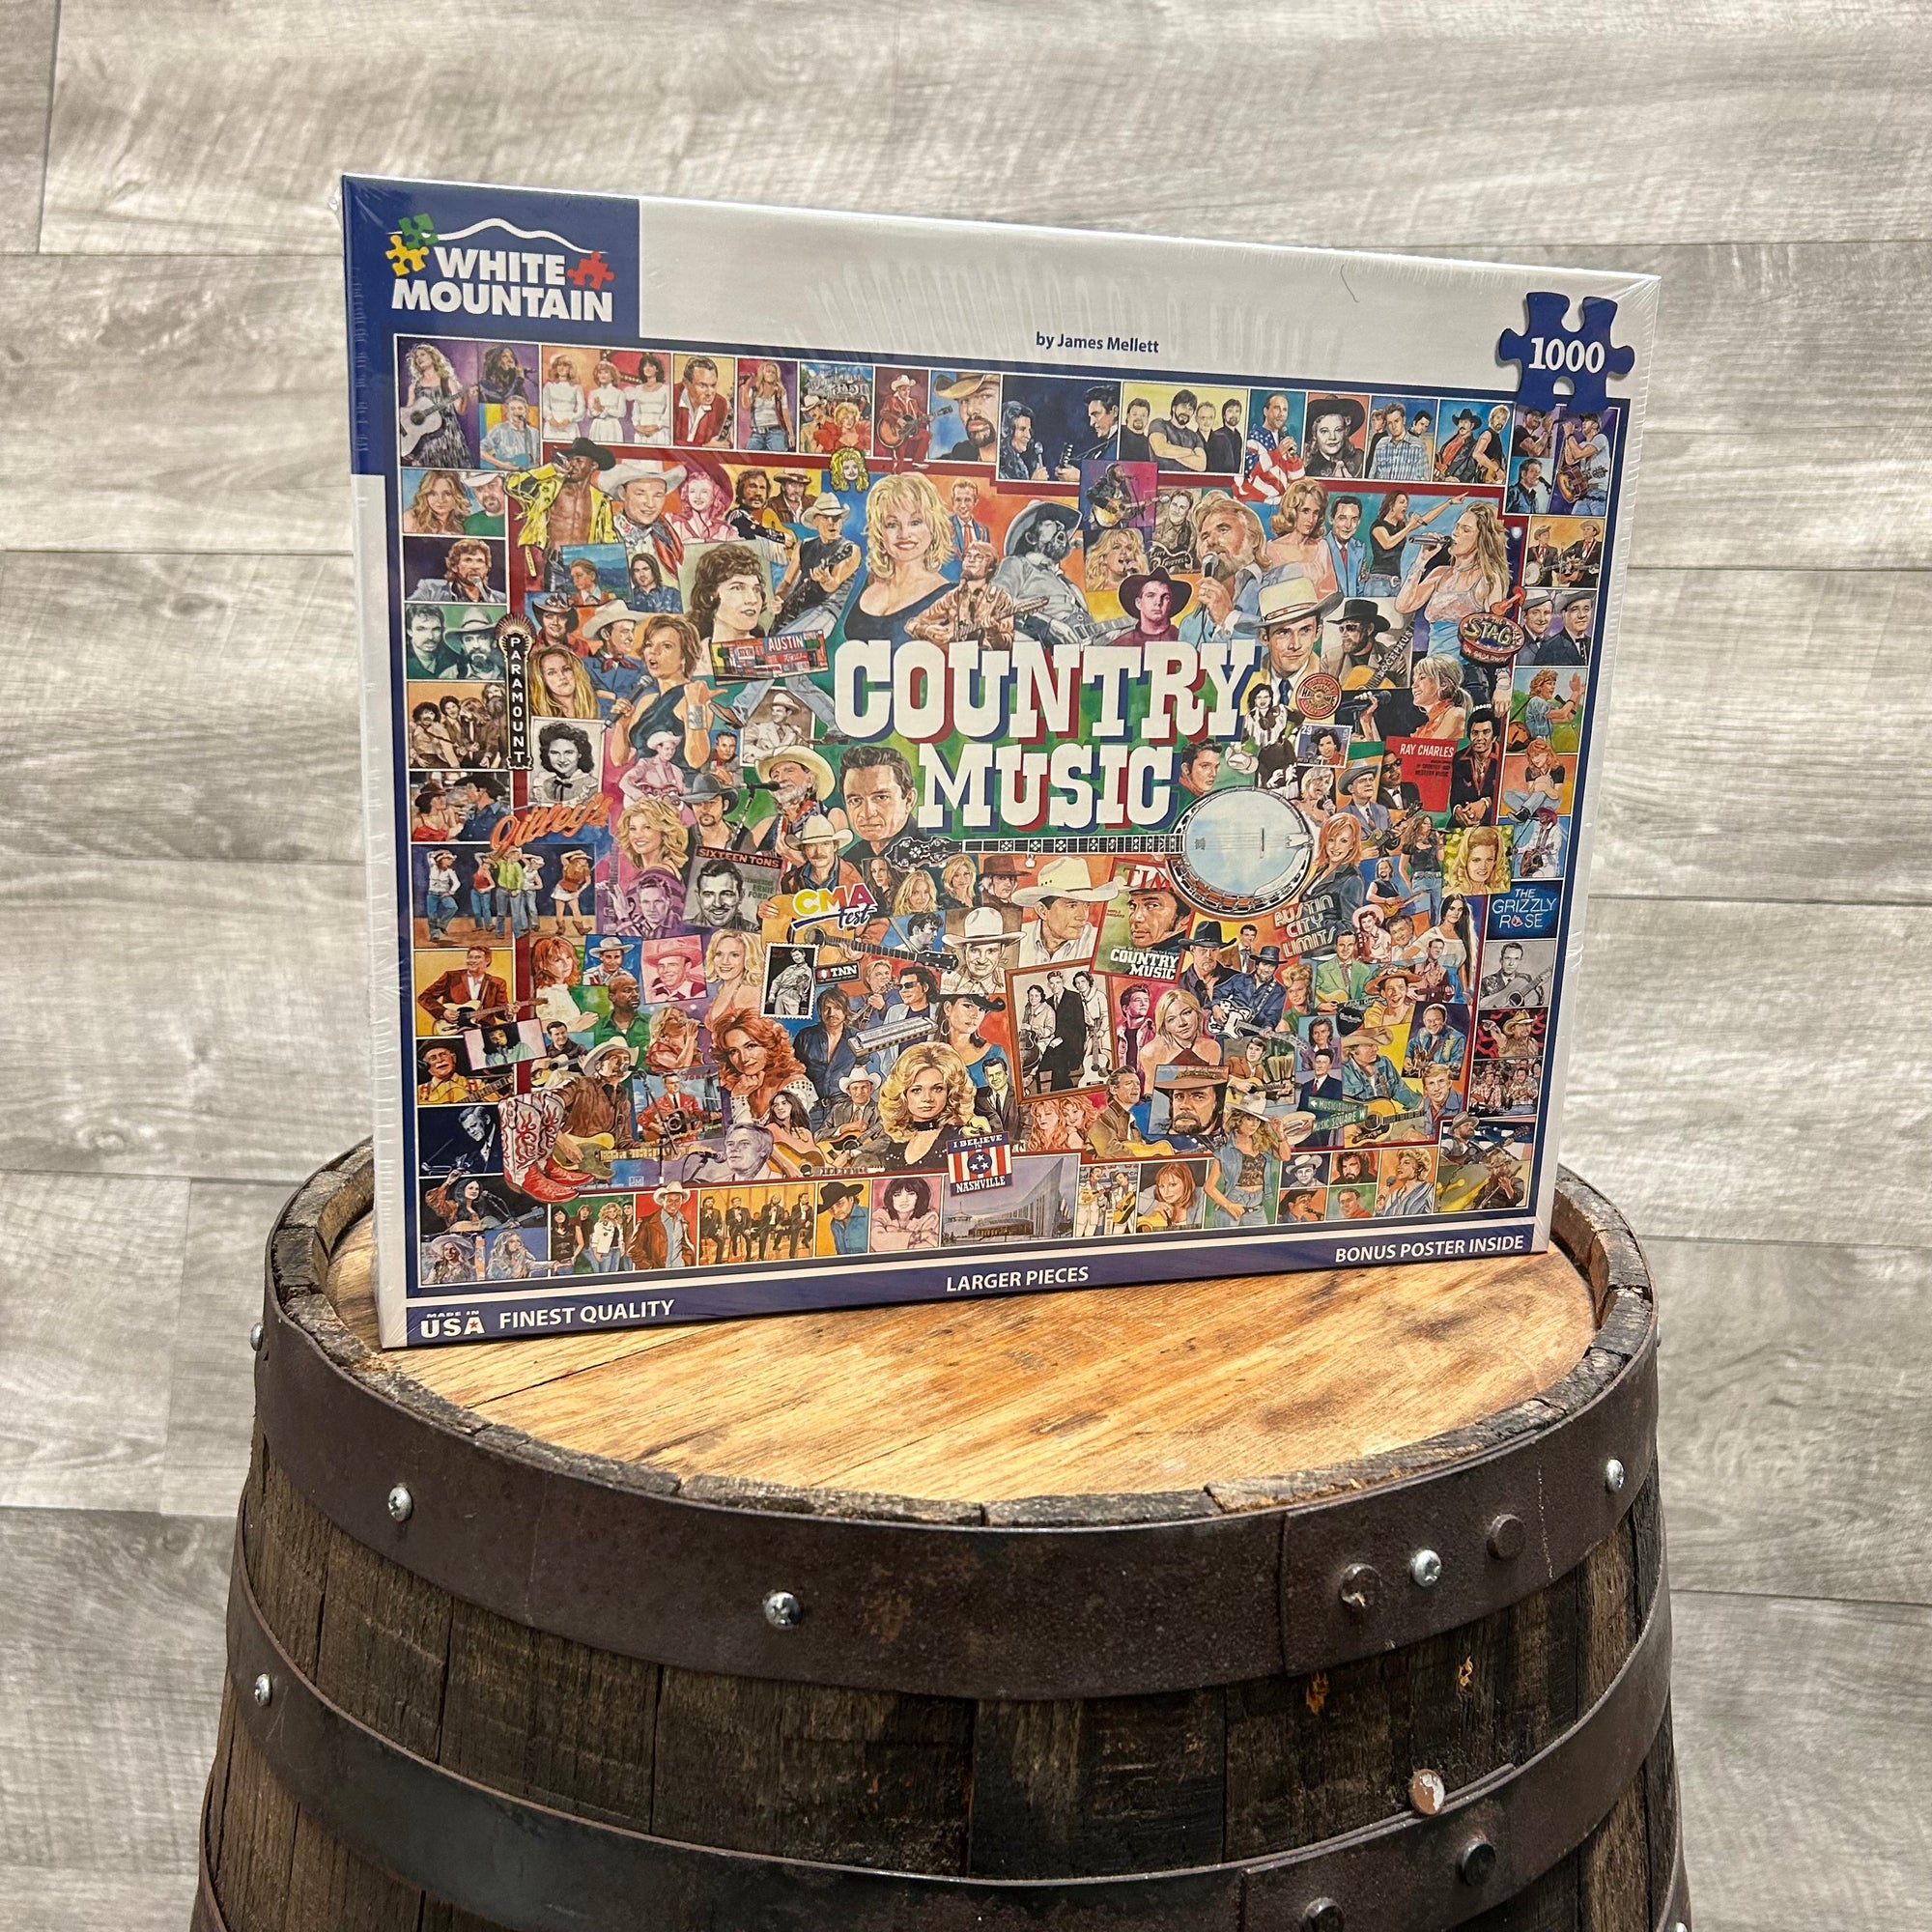 1000 Piece "Country Music" Jigsaw Puzzle